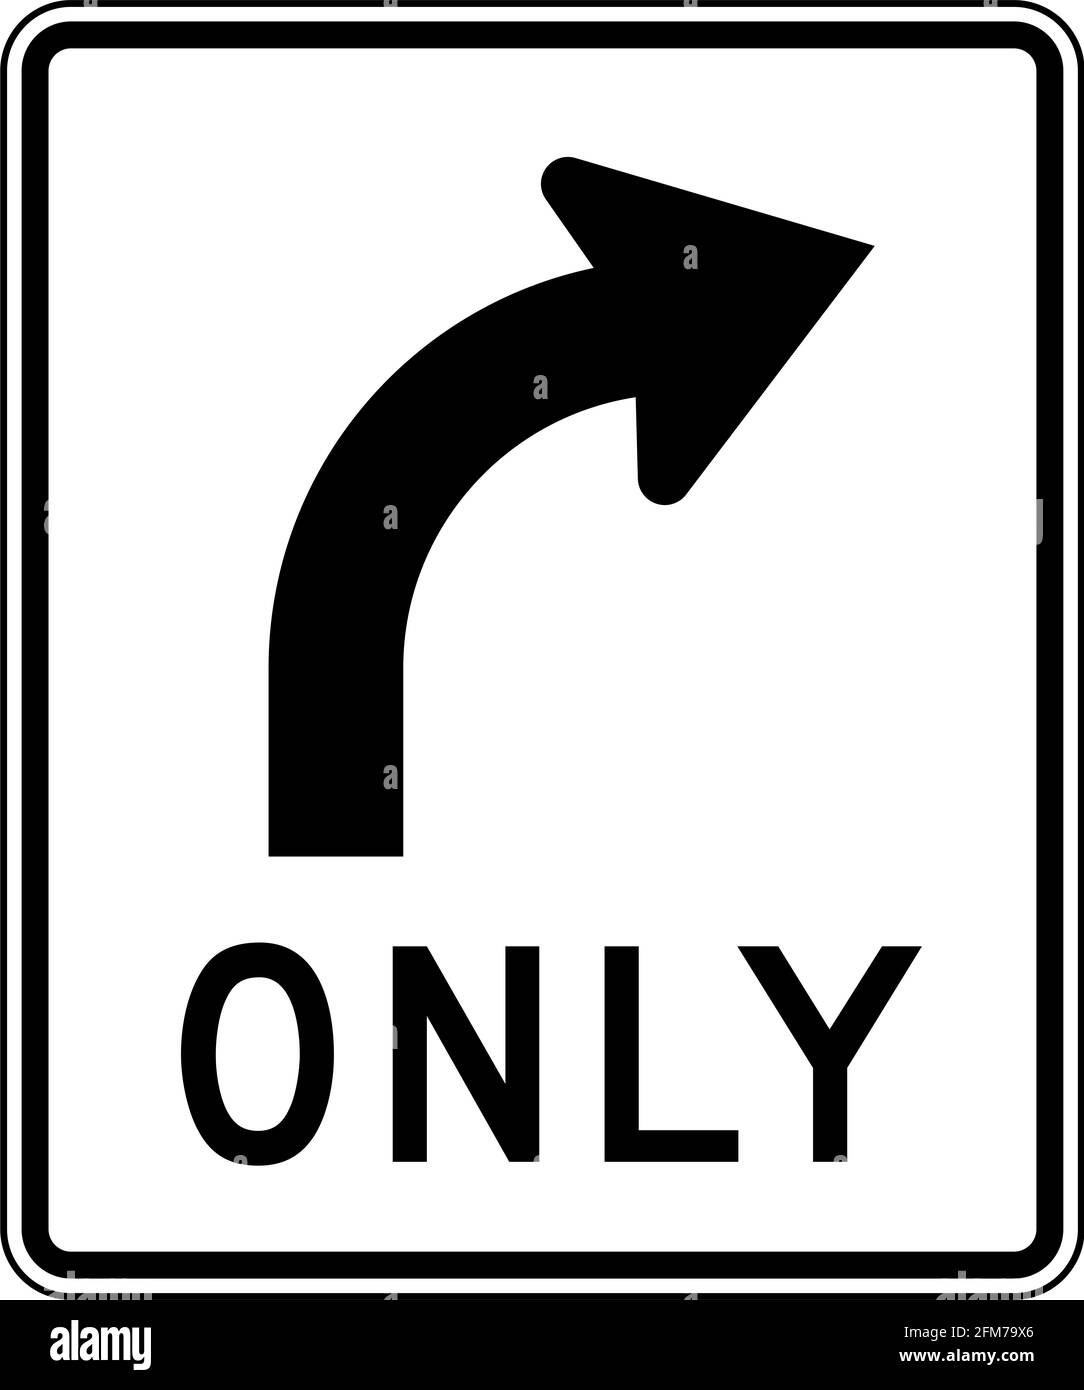 Right Turn Only Official US Road Sign Illustration Stock Photo